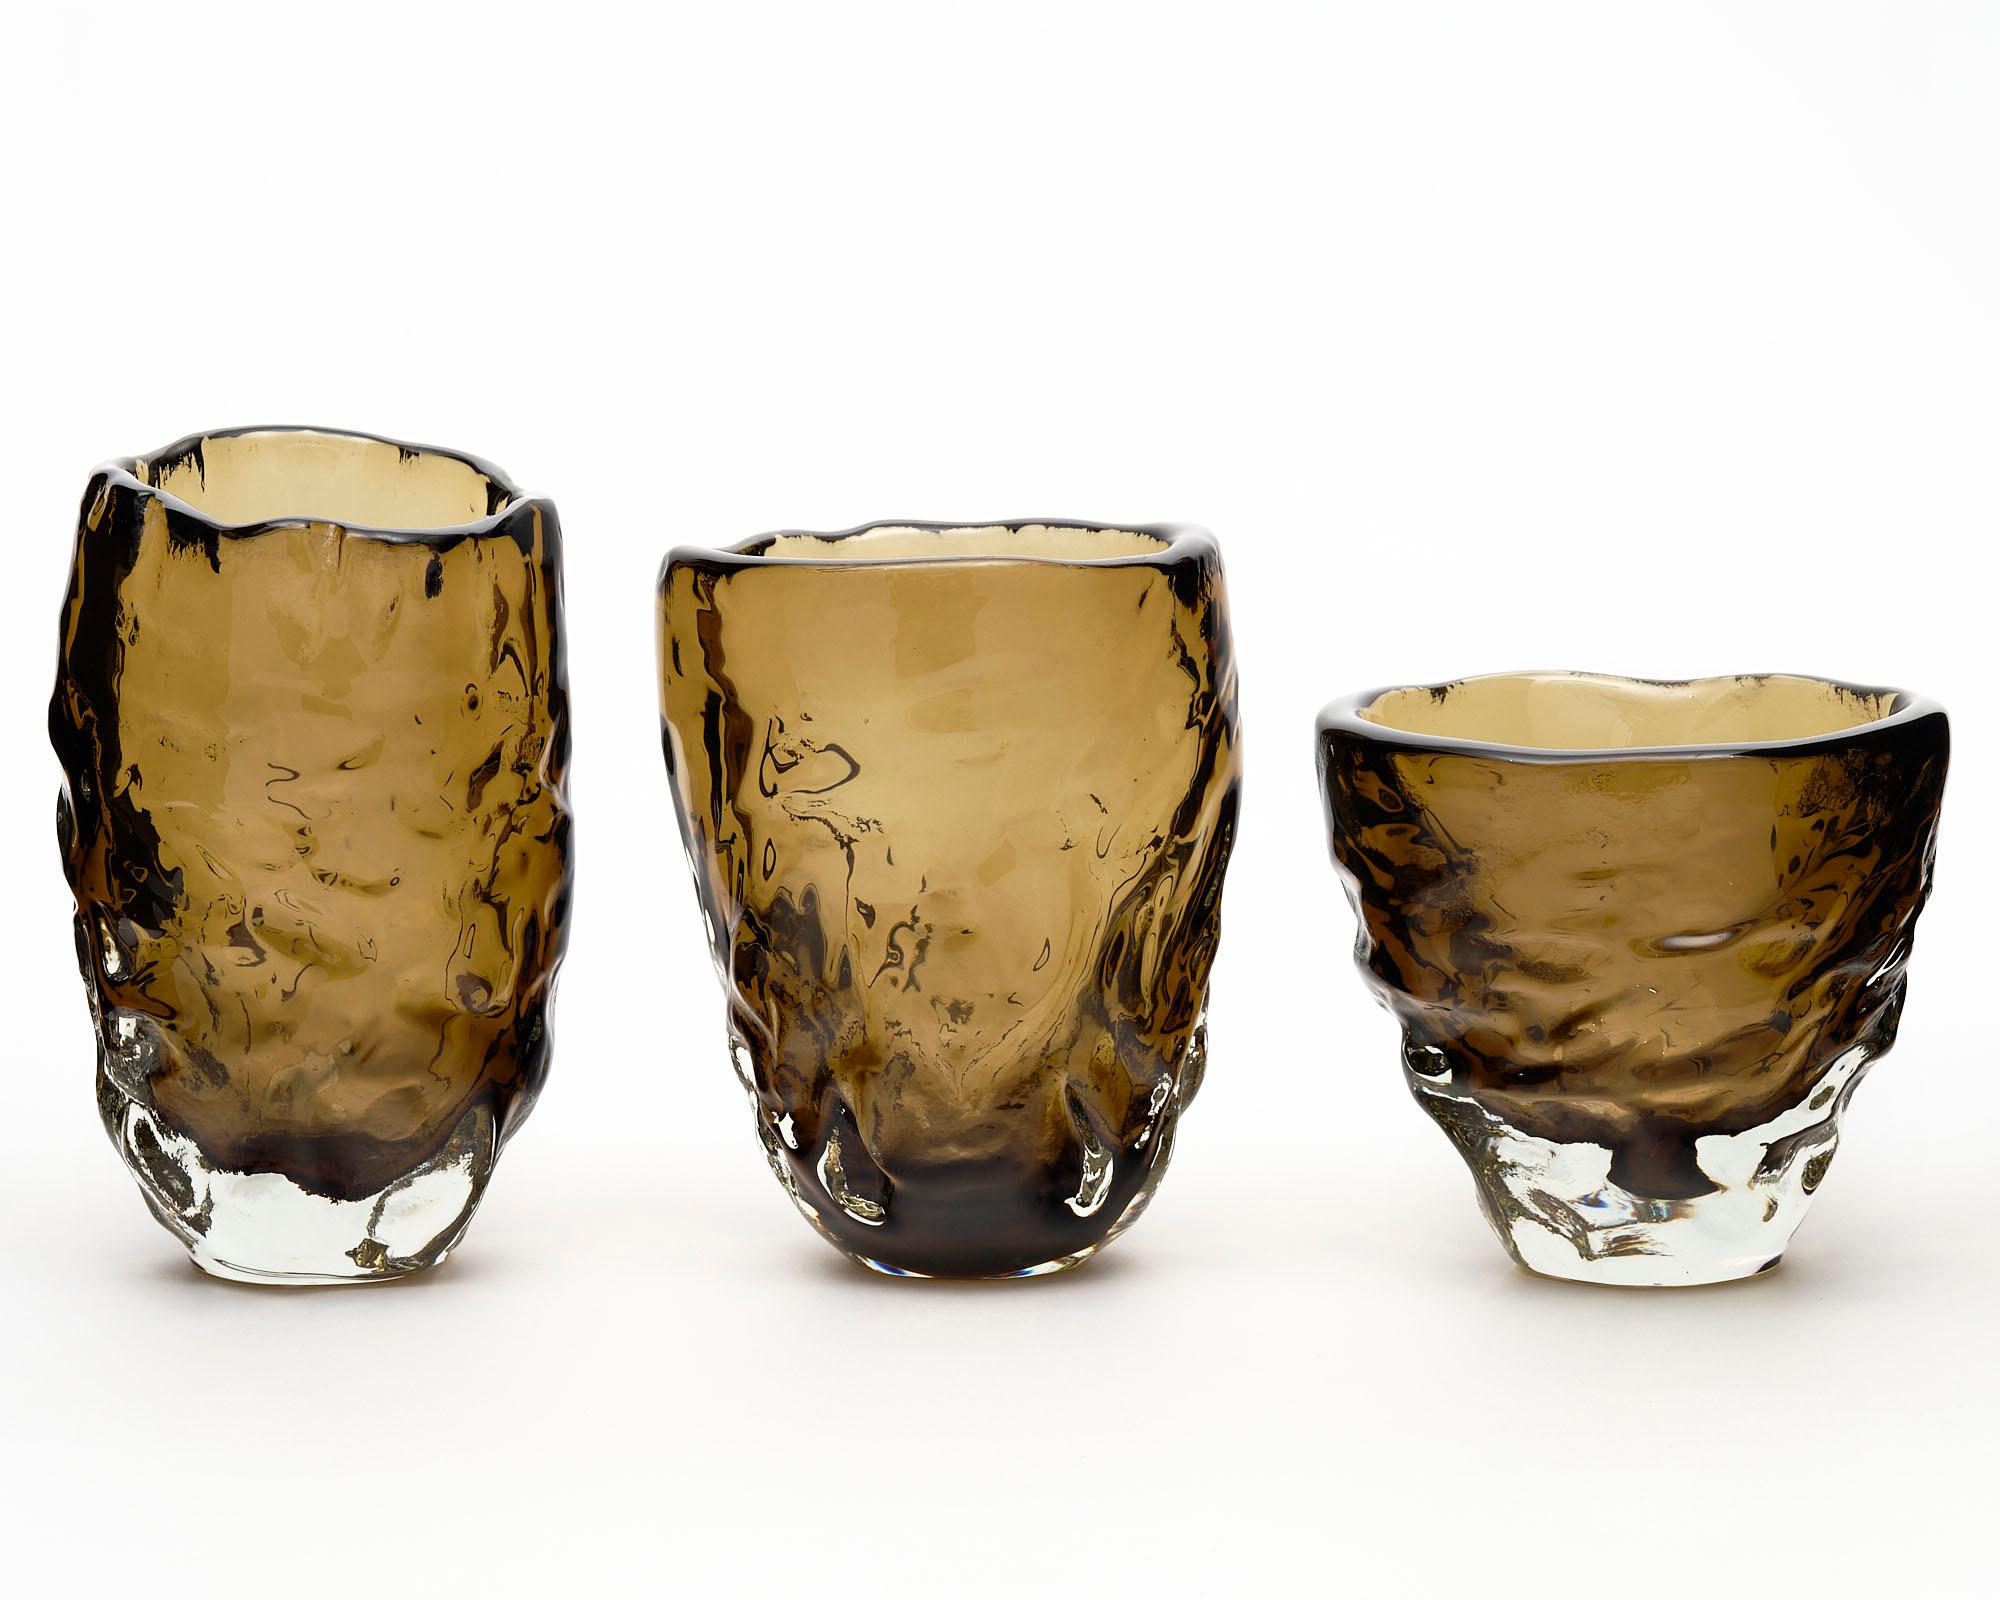 Set of three vases from the Island of Murano outside of Venice, Italy. They are hand blown in a tobacco color glass. The organic shape is an homage to Alberto Burri. Created by A. Donna. 

Measures: Large

Diameter: 8.25